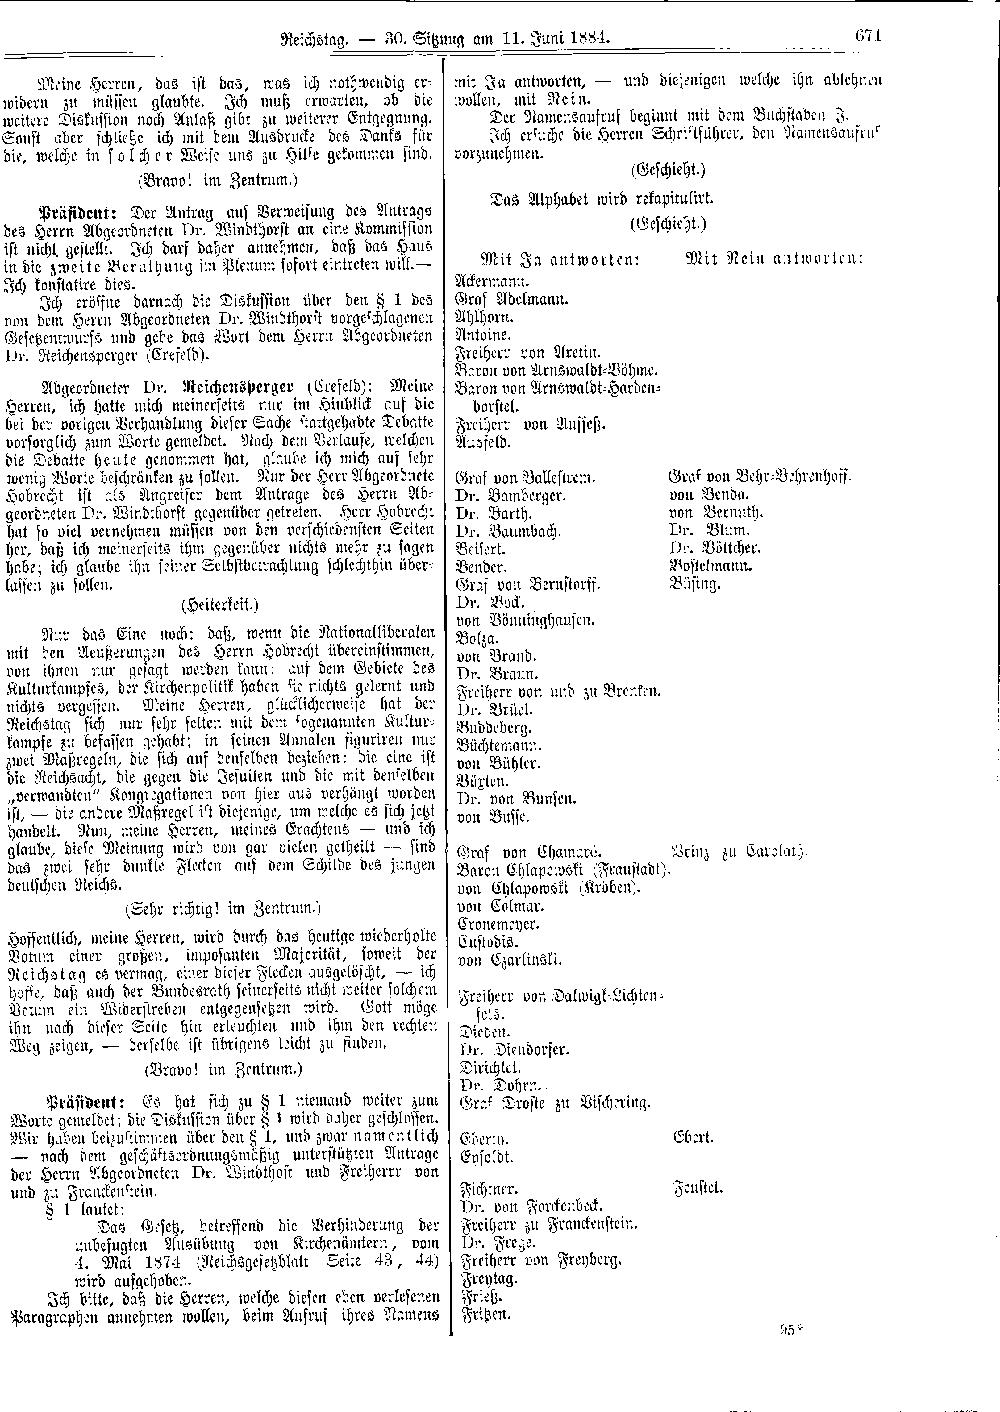 Scan of page 671